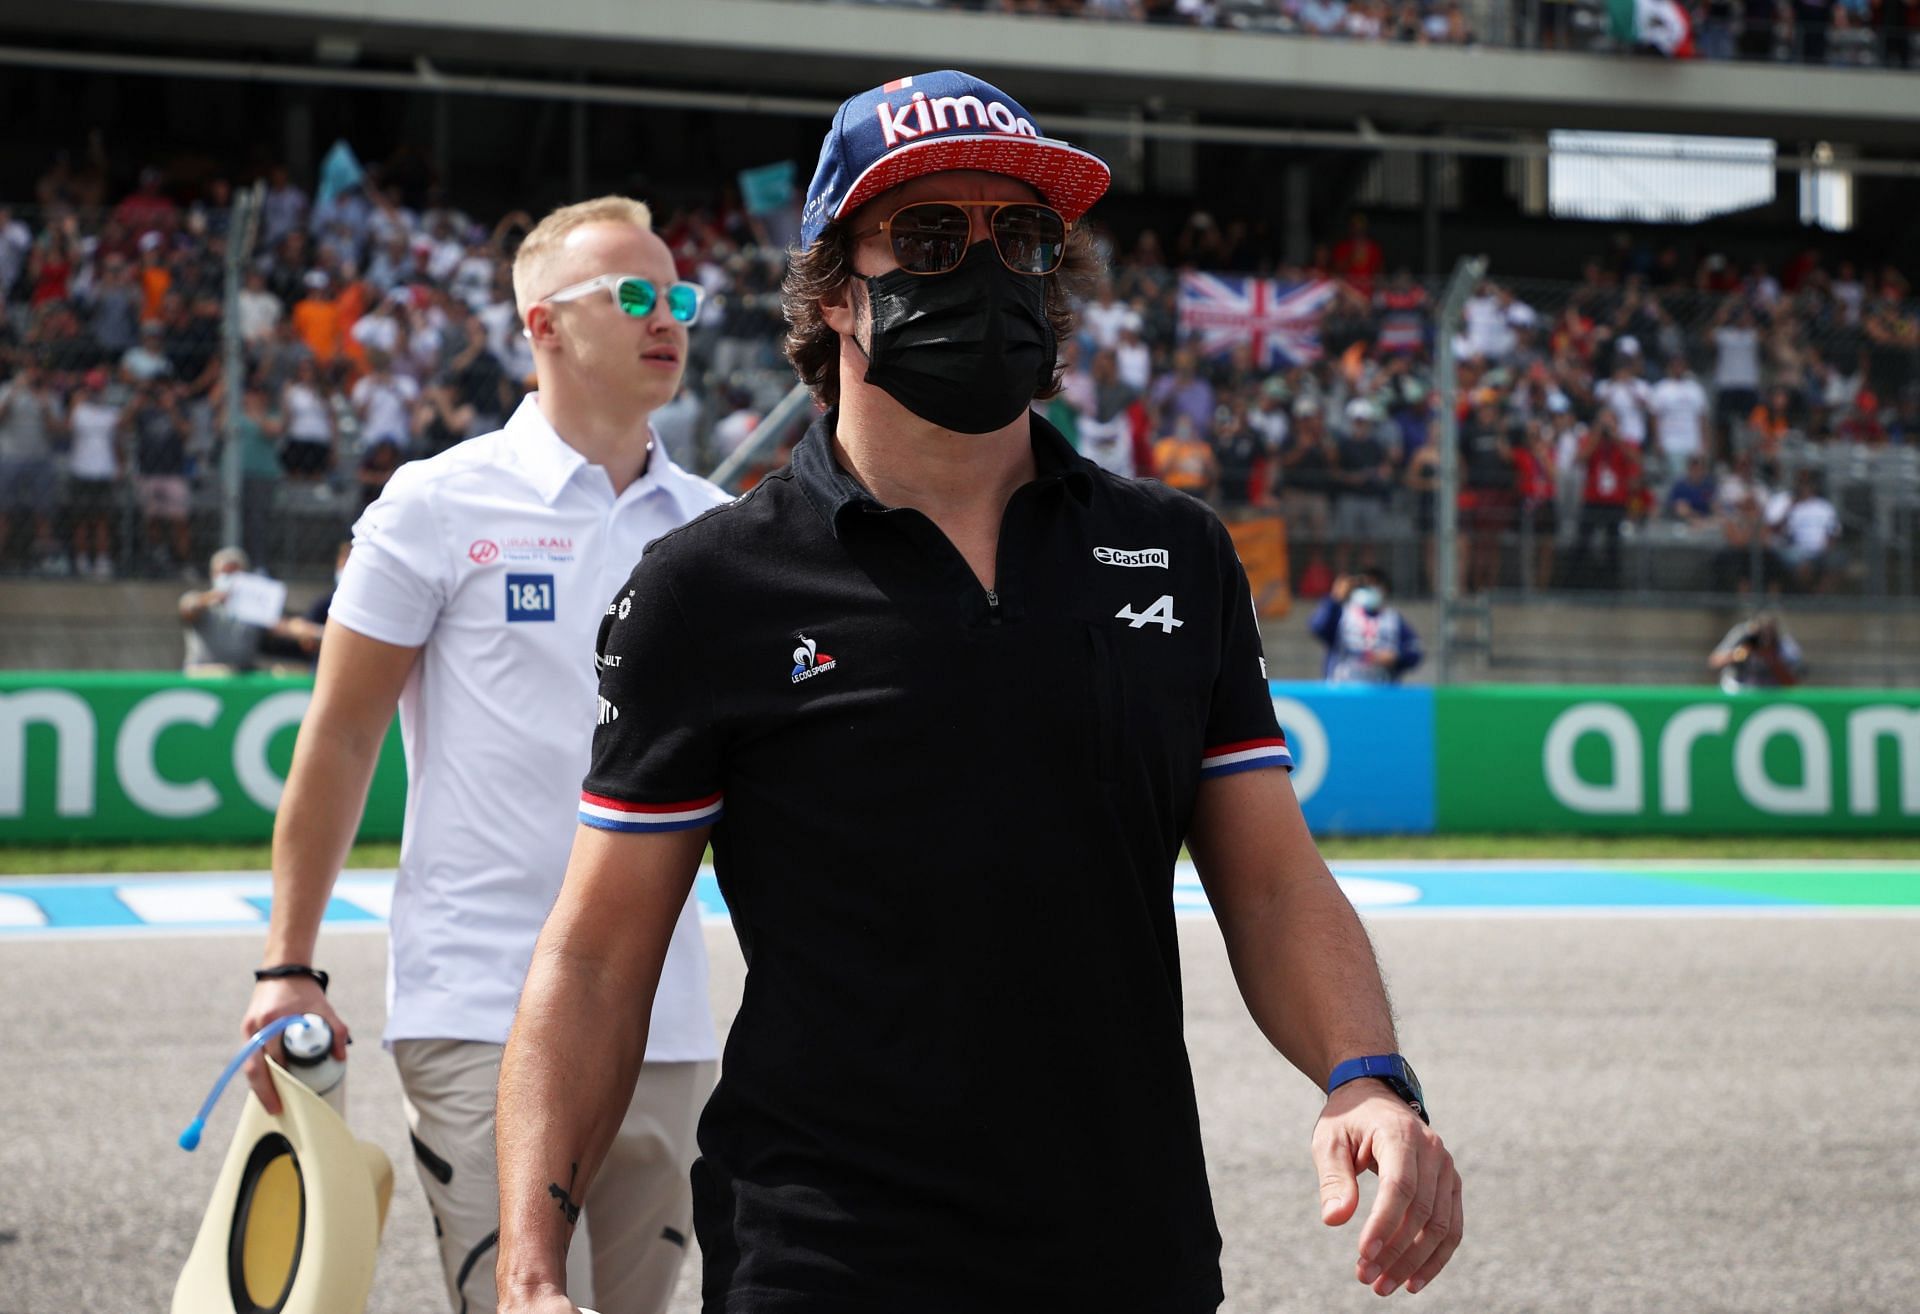 Fernando Alonso of Alpine F1 Team walks in the Paddock before the2021 USGPin Austin, Texas. (Photo by Chris Graythen/Getty Images)